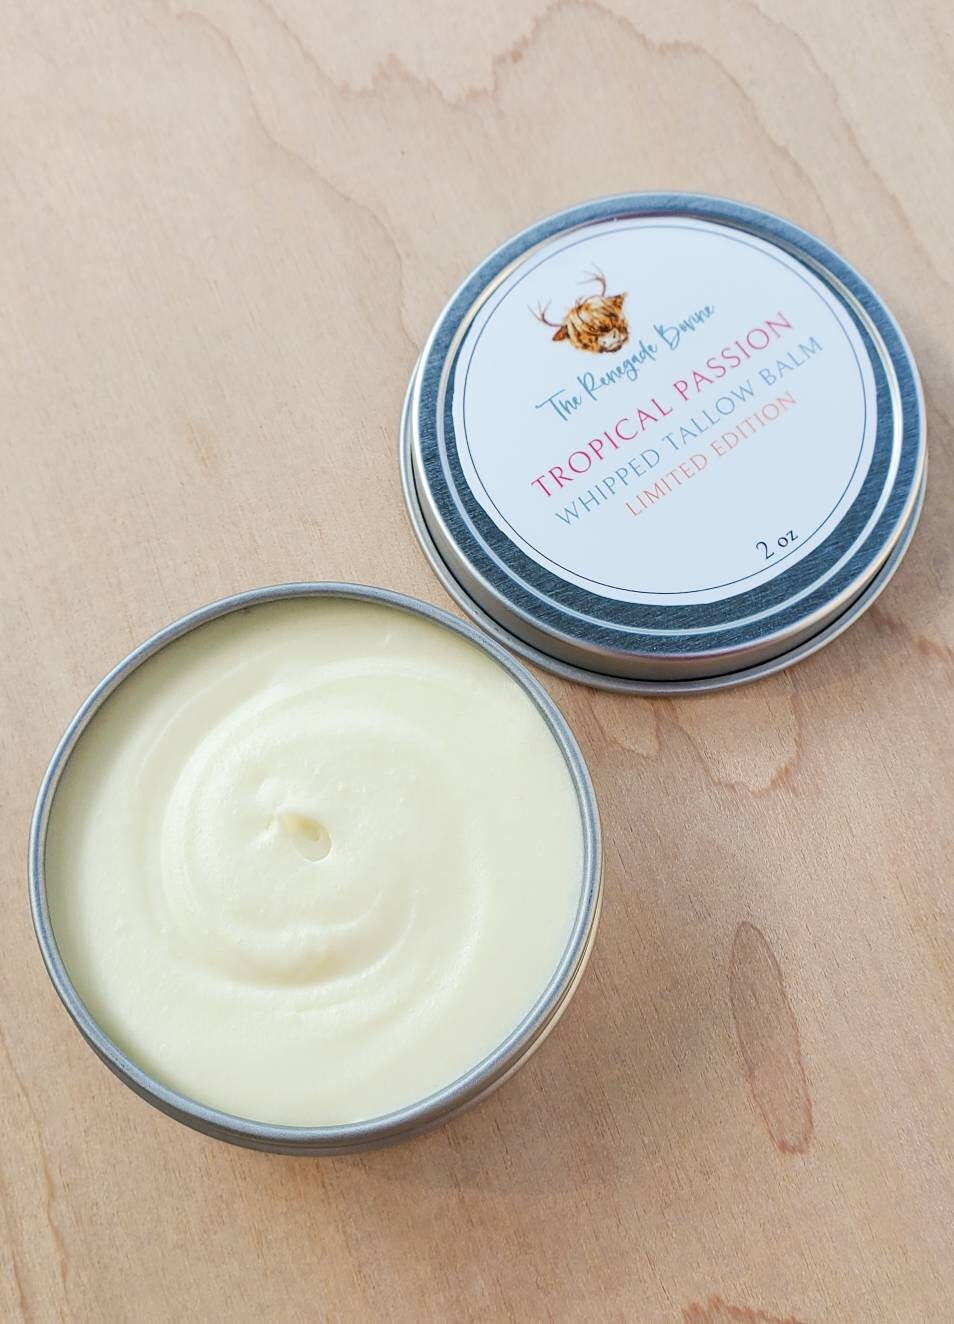 Tropical Passion Whipped Tallow Balm